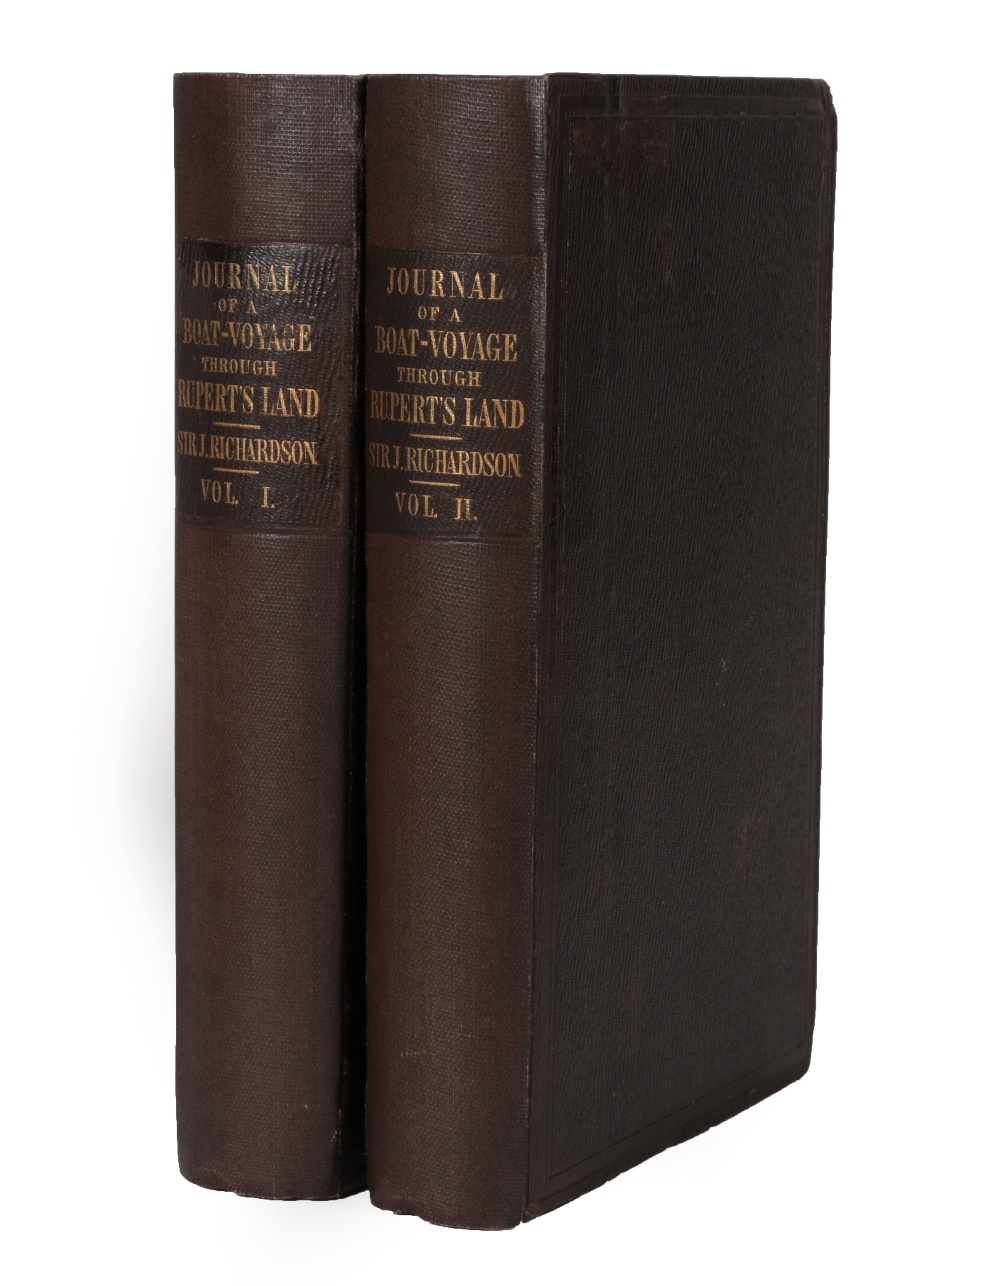 Richardson (Sir John) Arctic Searching Expedition: A Journal of a Boat-Voyage through Rupert's